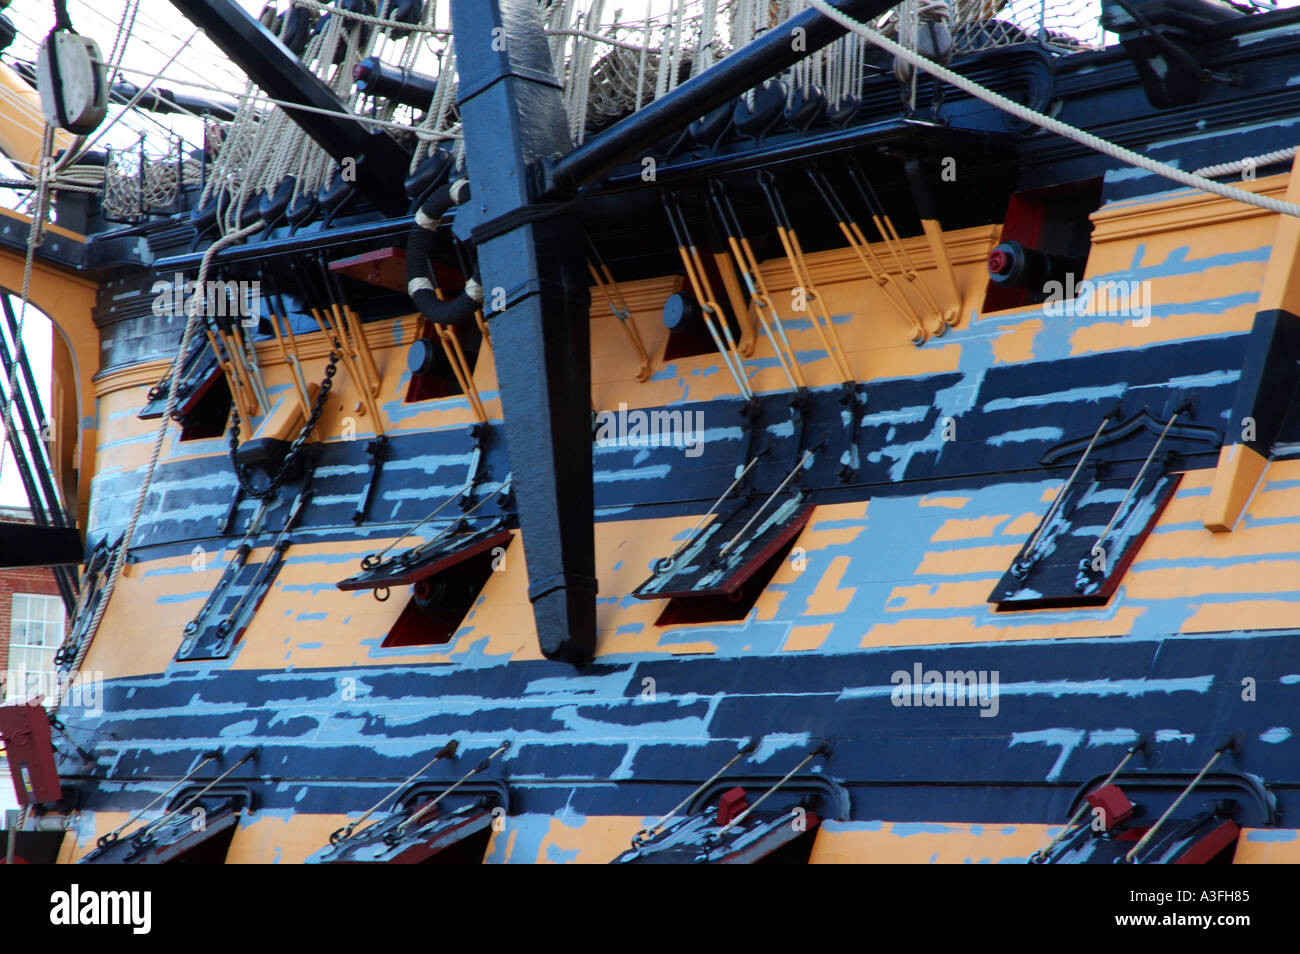 Repainting HMS Victory at Portsmouth historic dockyard UK Stock Photo